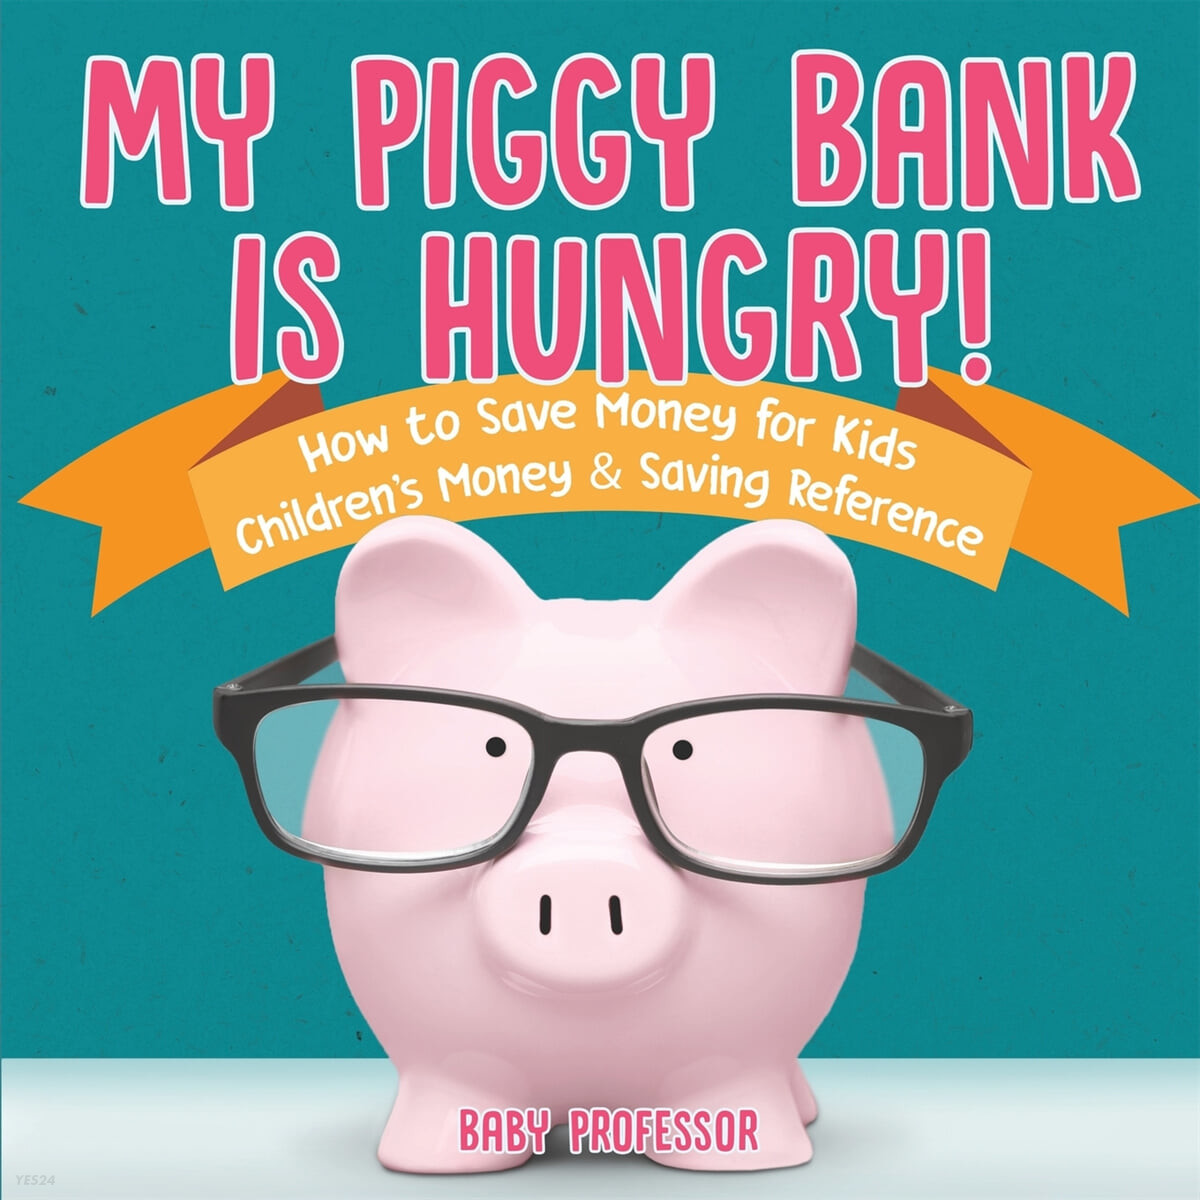 My Piggy Bank is Hungry! How to Save money for Kids - Children’s Money & Saving Reference